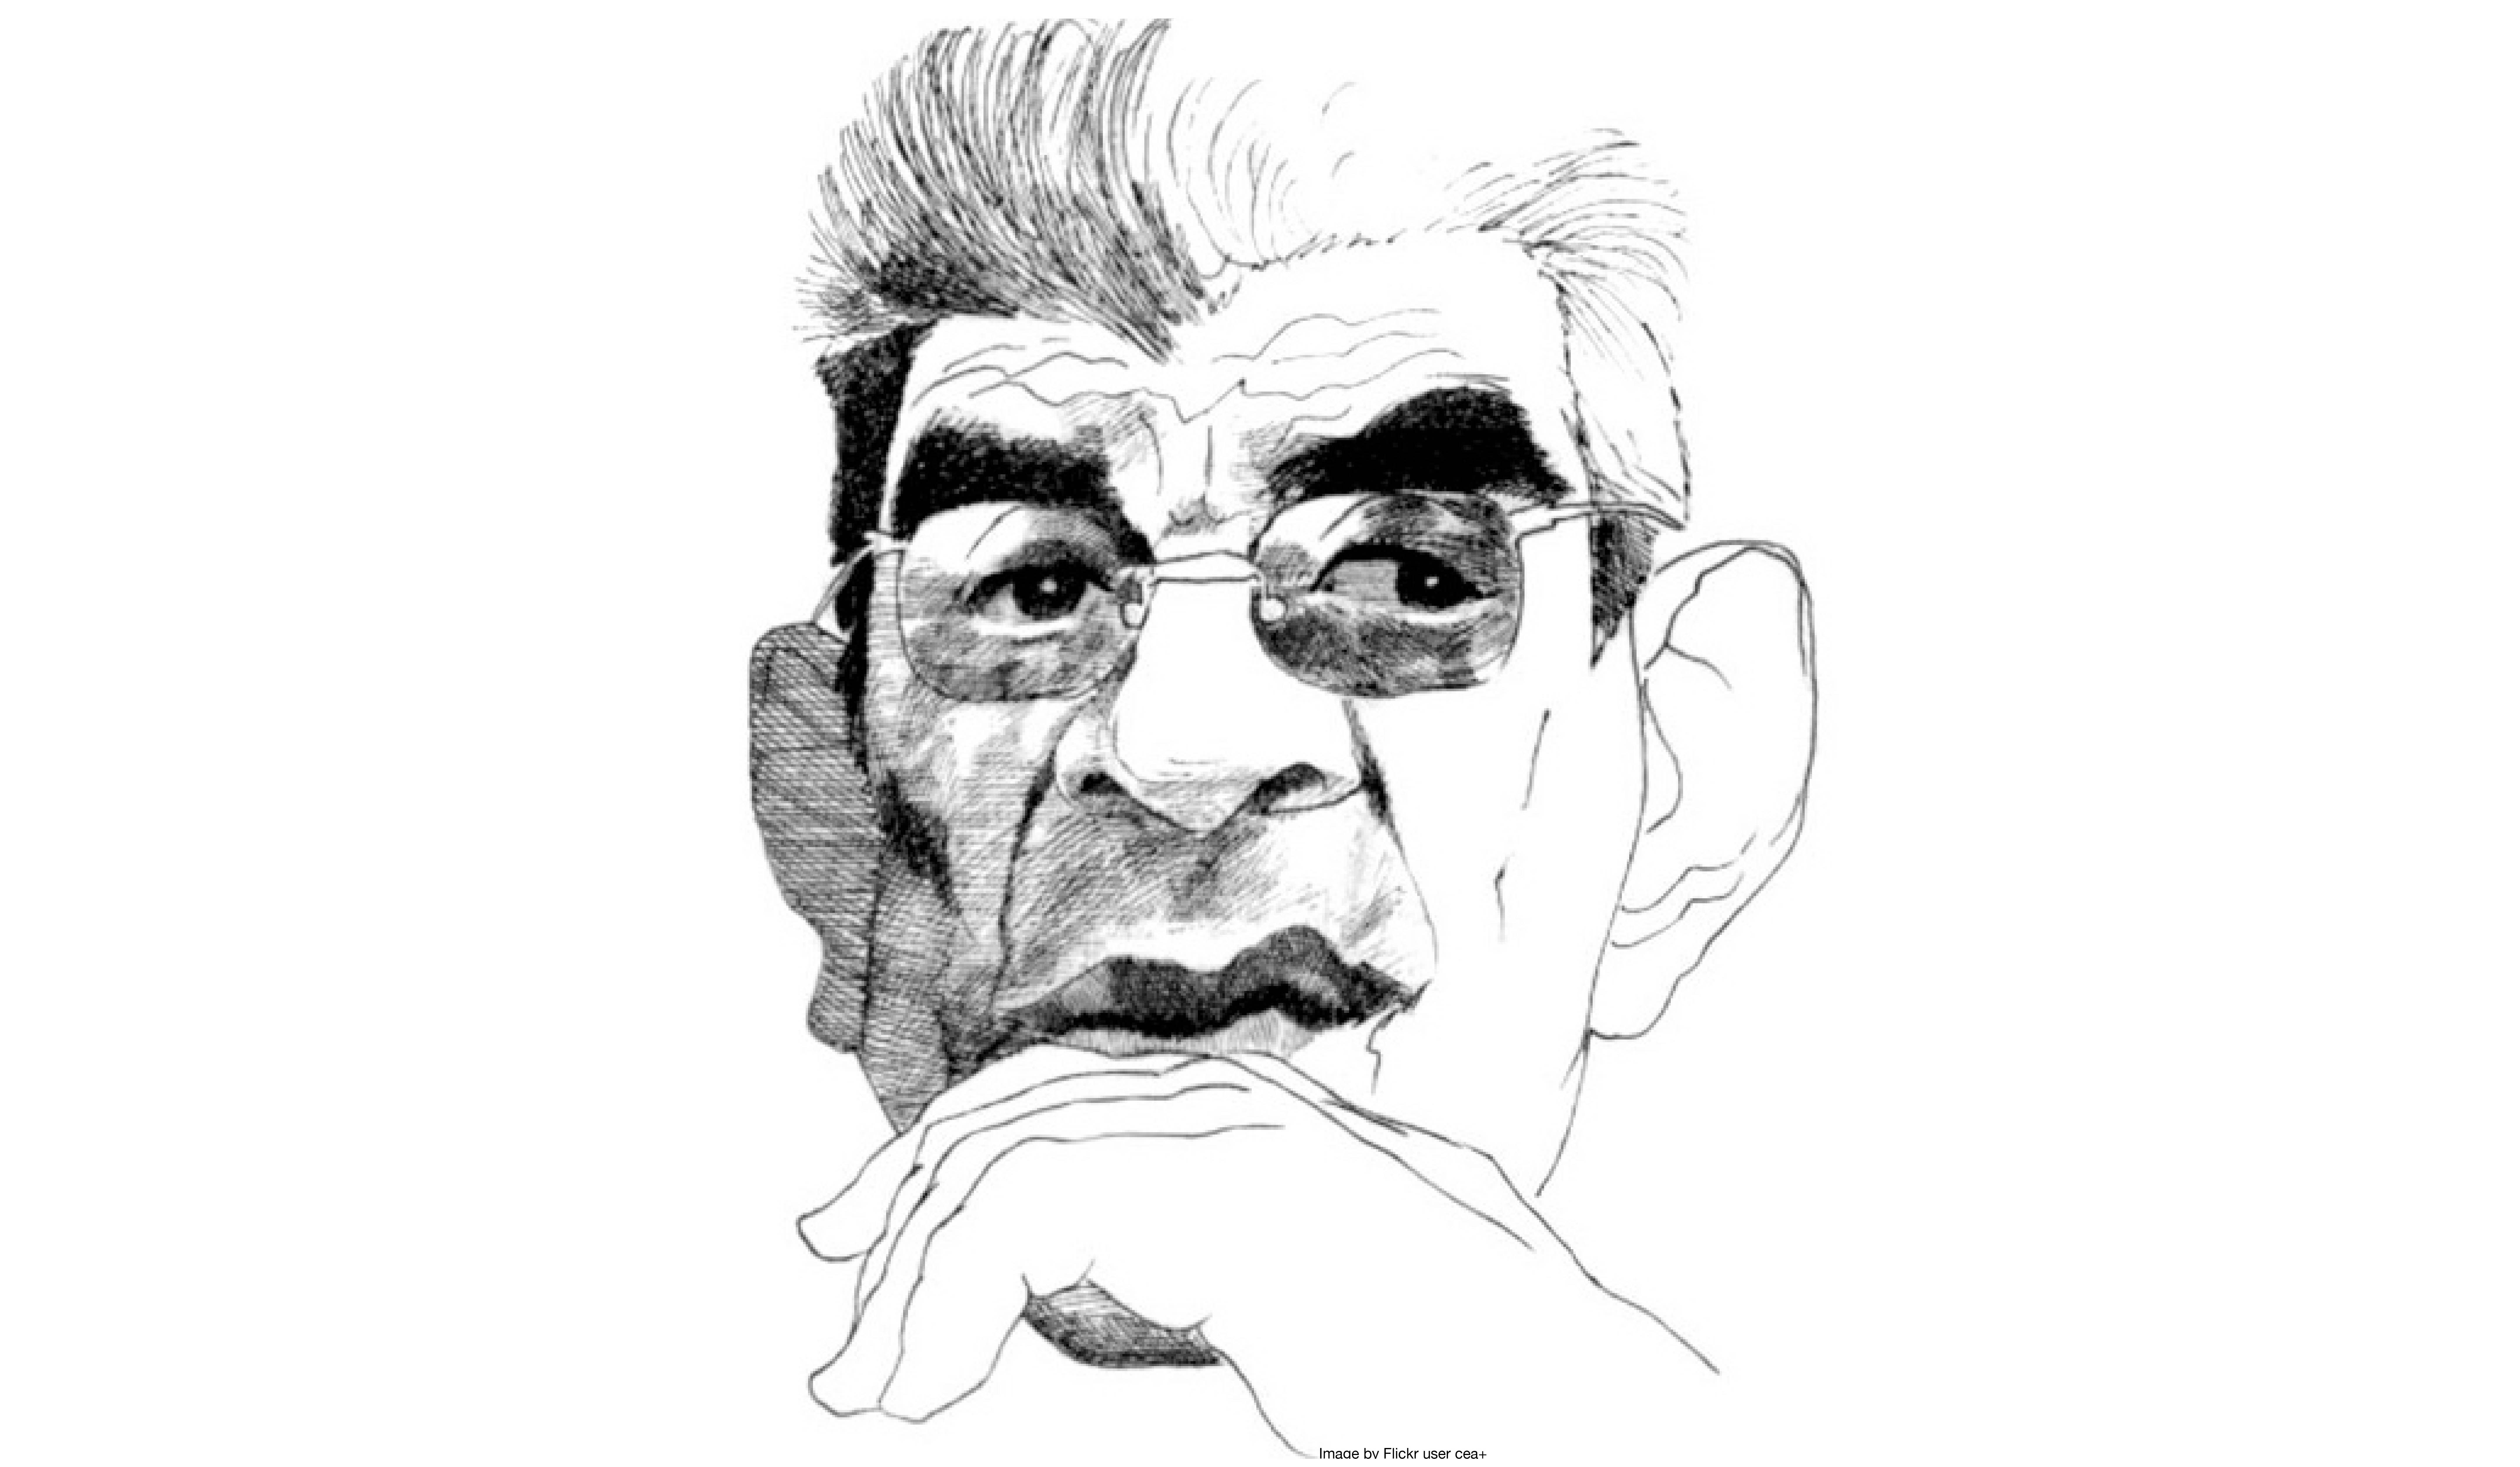 Jacques Lacan drawing (rights free by Flickr user cea+)